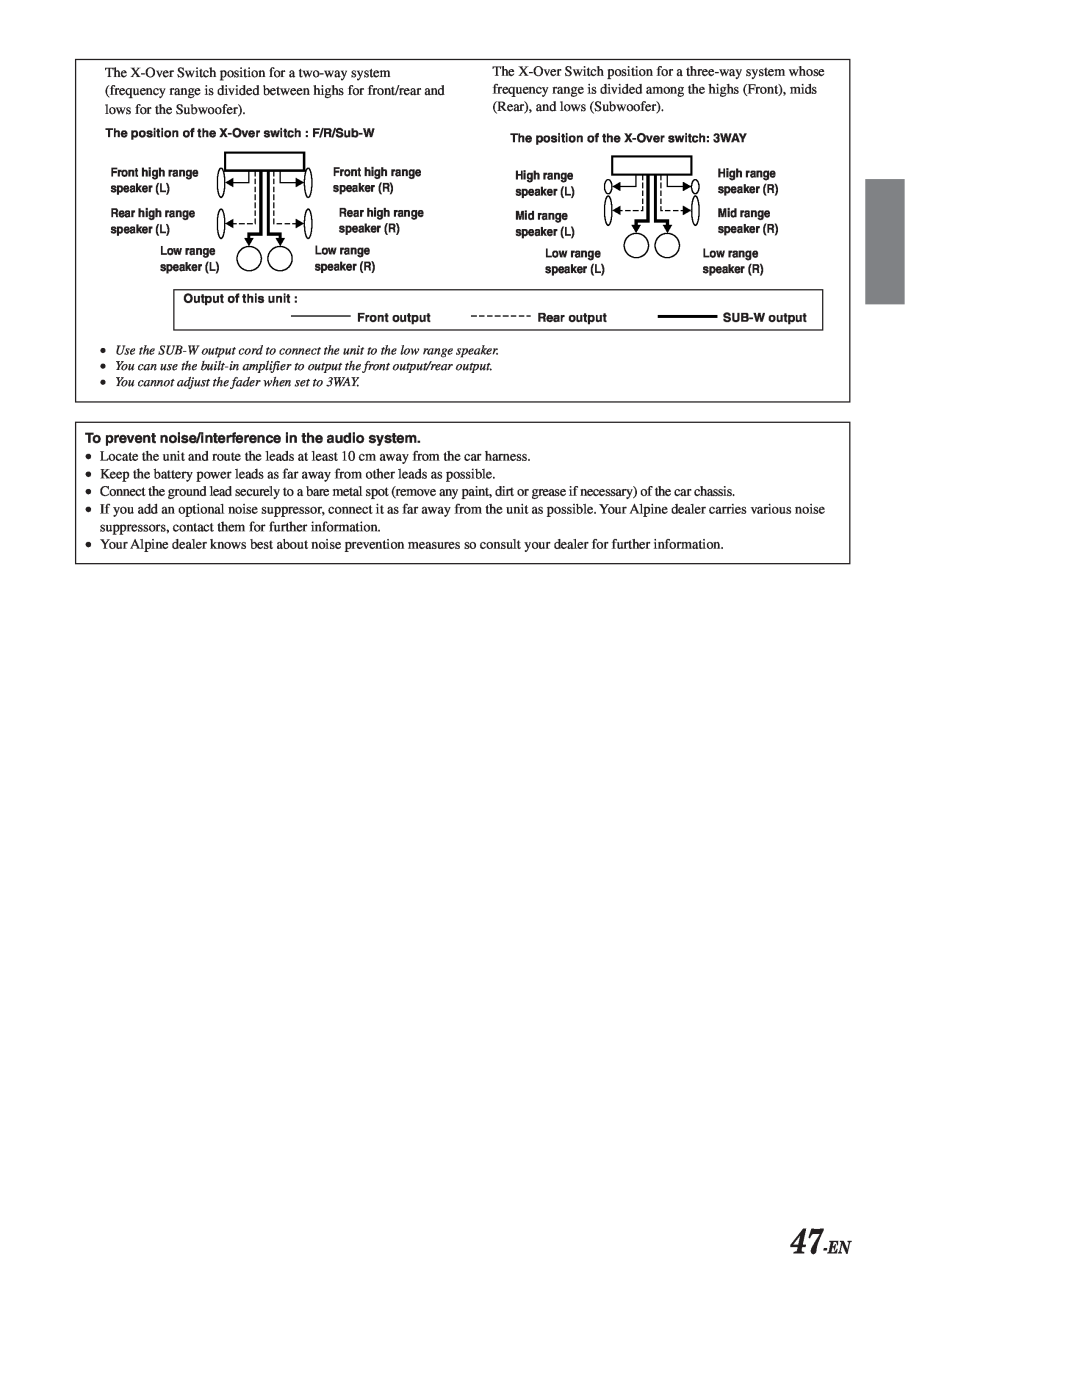 Alpine CDA-9855, CDA-9853 owner manual 47-EN, To prevent noise/interference in the audio system 